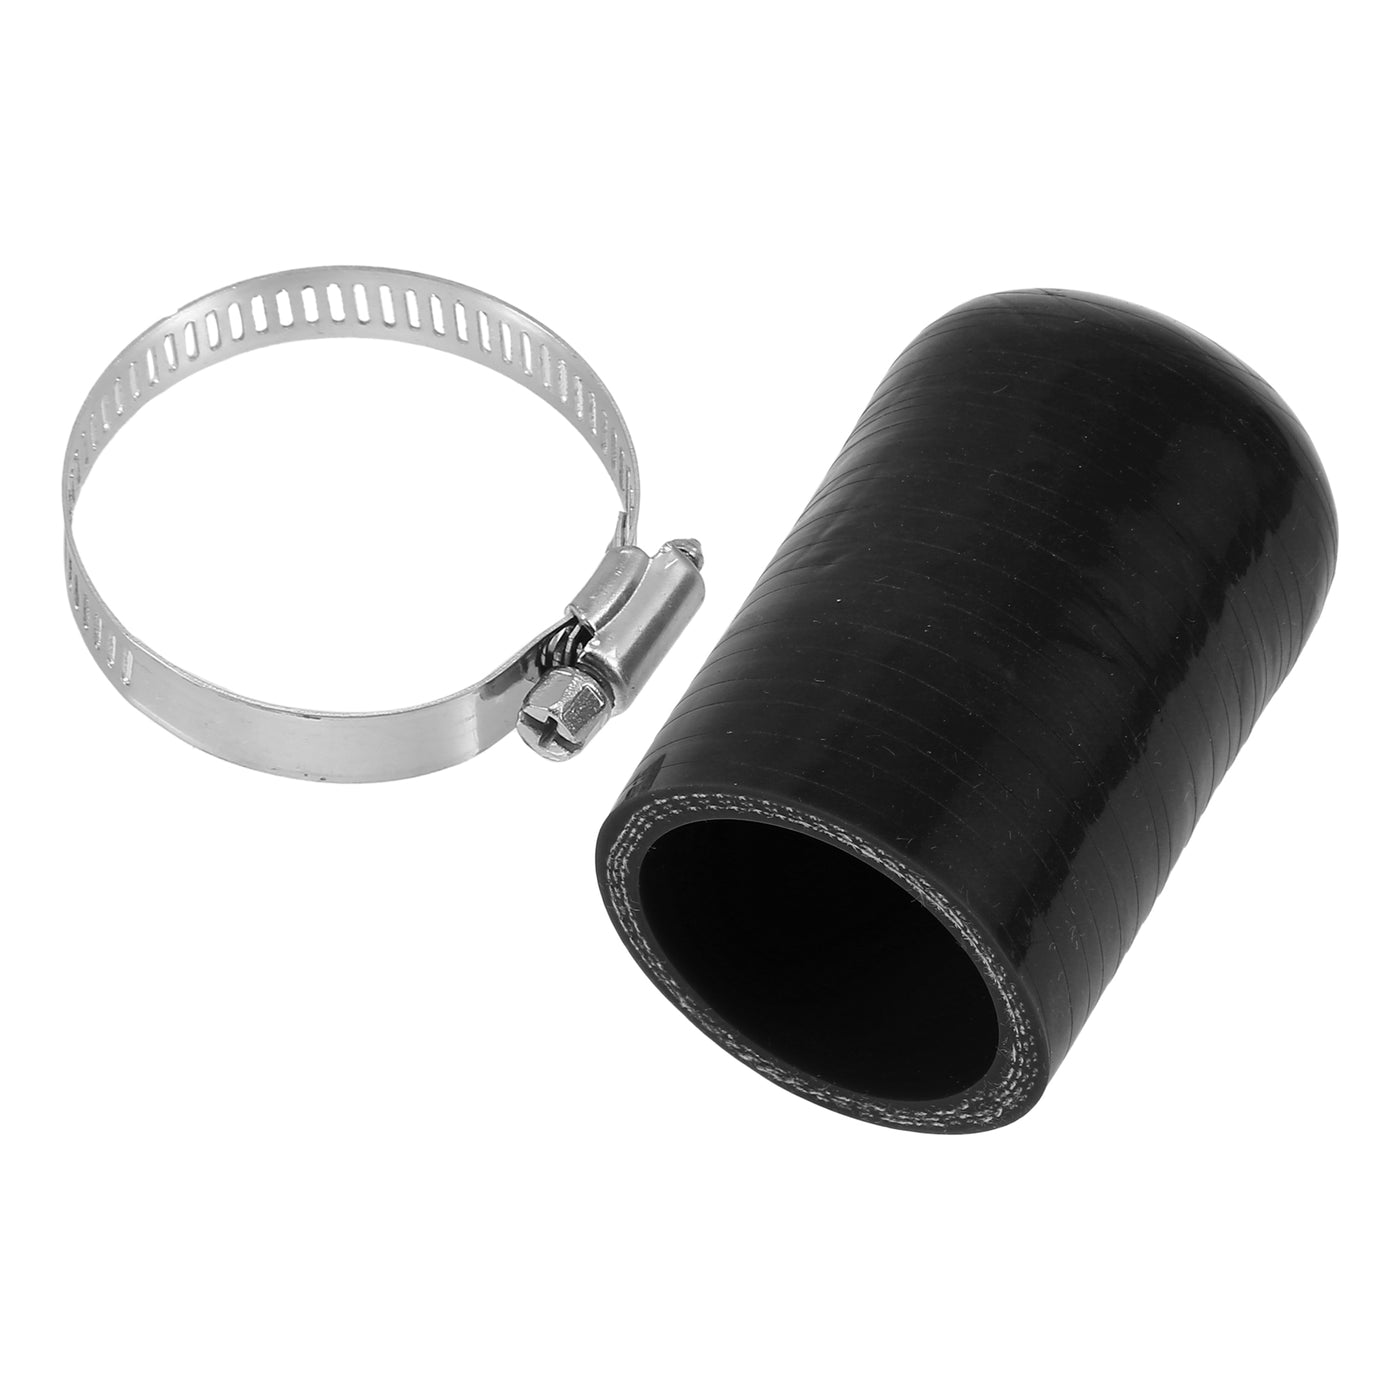 X AUTOHAUX 1 Pcs 60mm Length 38mm/1.50" ID Black Car Silicone Rubber Hose End Cap with Clamp Silicone Reinforced Blanking Cap for Bypass Tube Universal